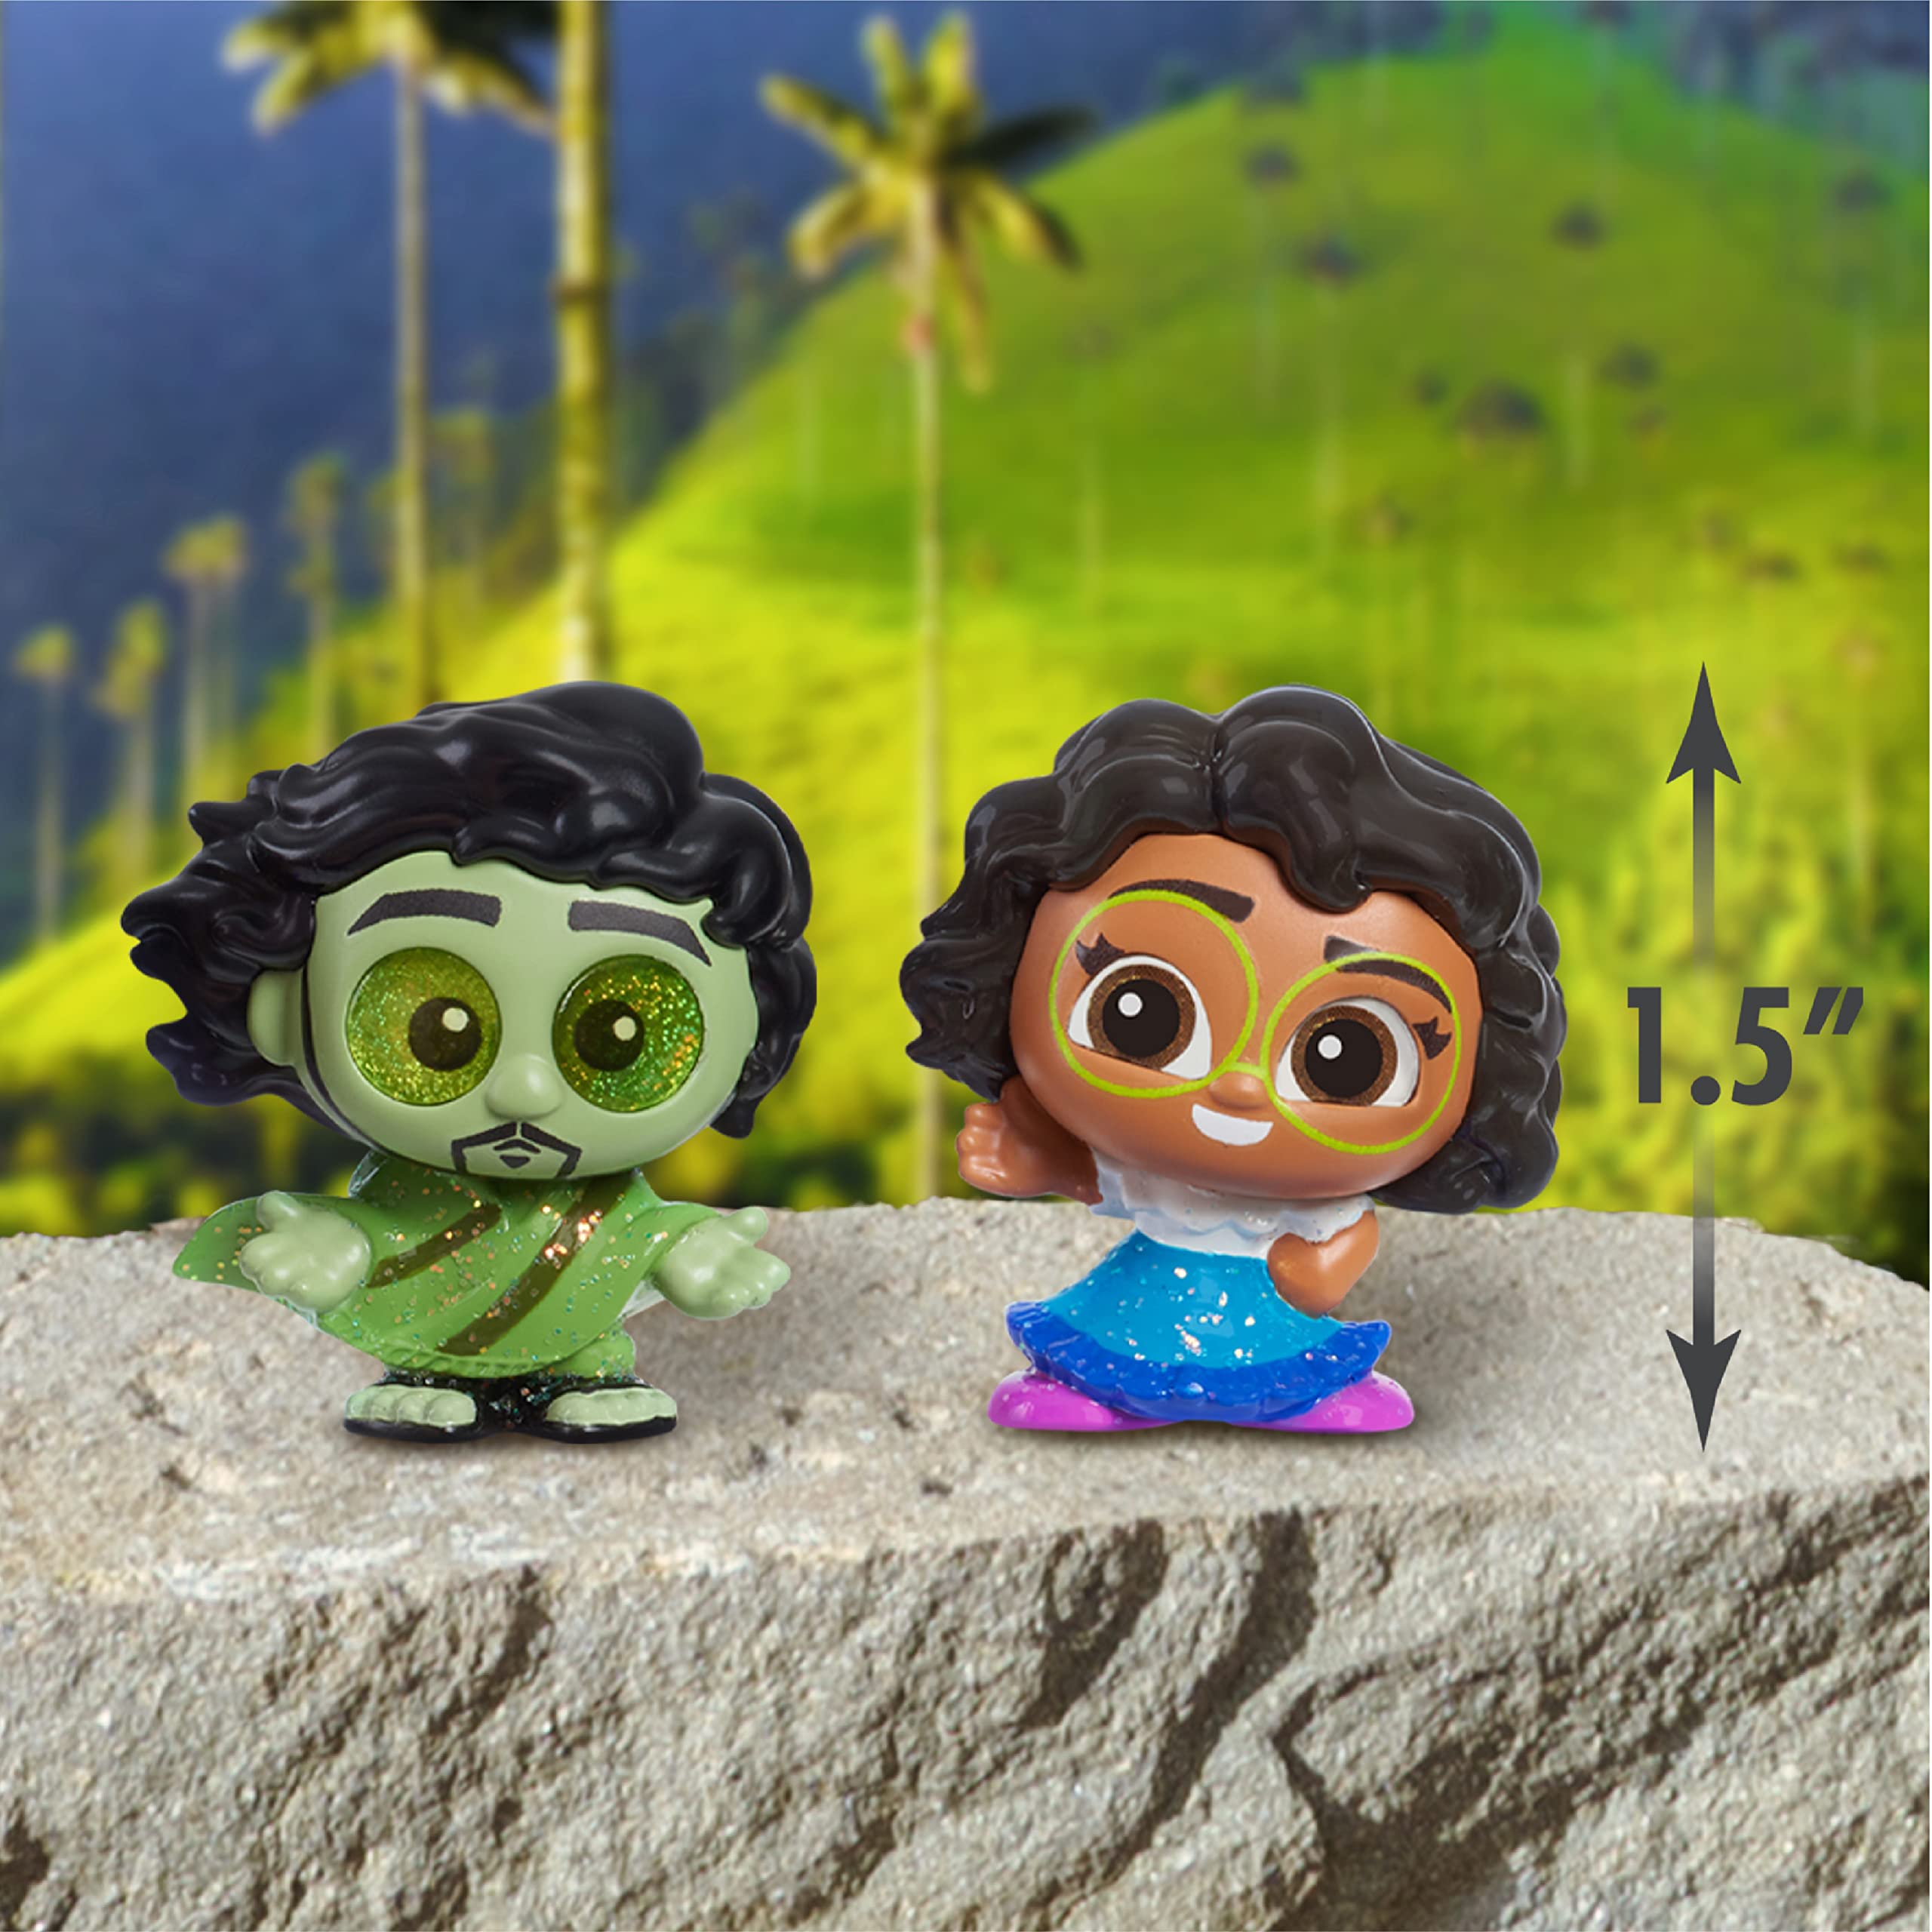 Disney Doorables Encanto Collection Peek, Collectible Figures, Officially Licensed Kids Toys for Ages 5 Up, and Presents